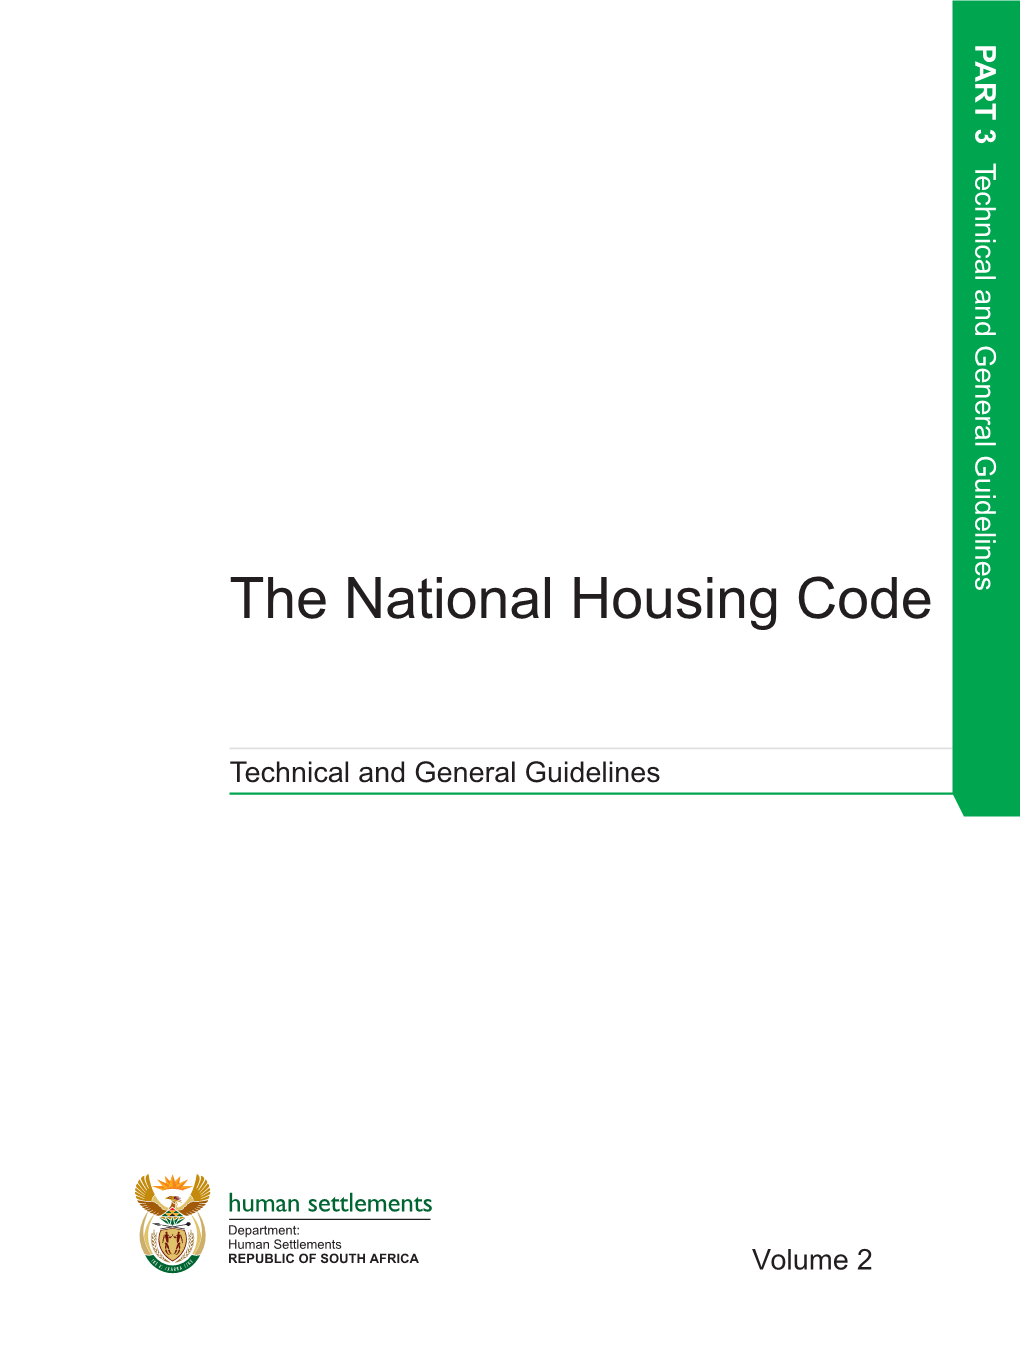 Technical and General Guidelines - Specified National Housing Programmes | Part 3 (Of the National Housing Code) | 2009